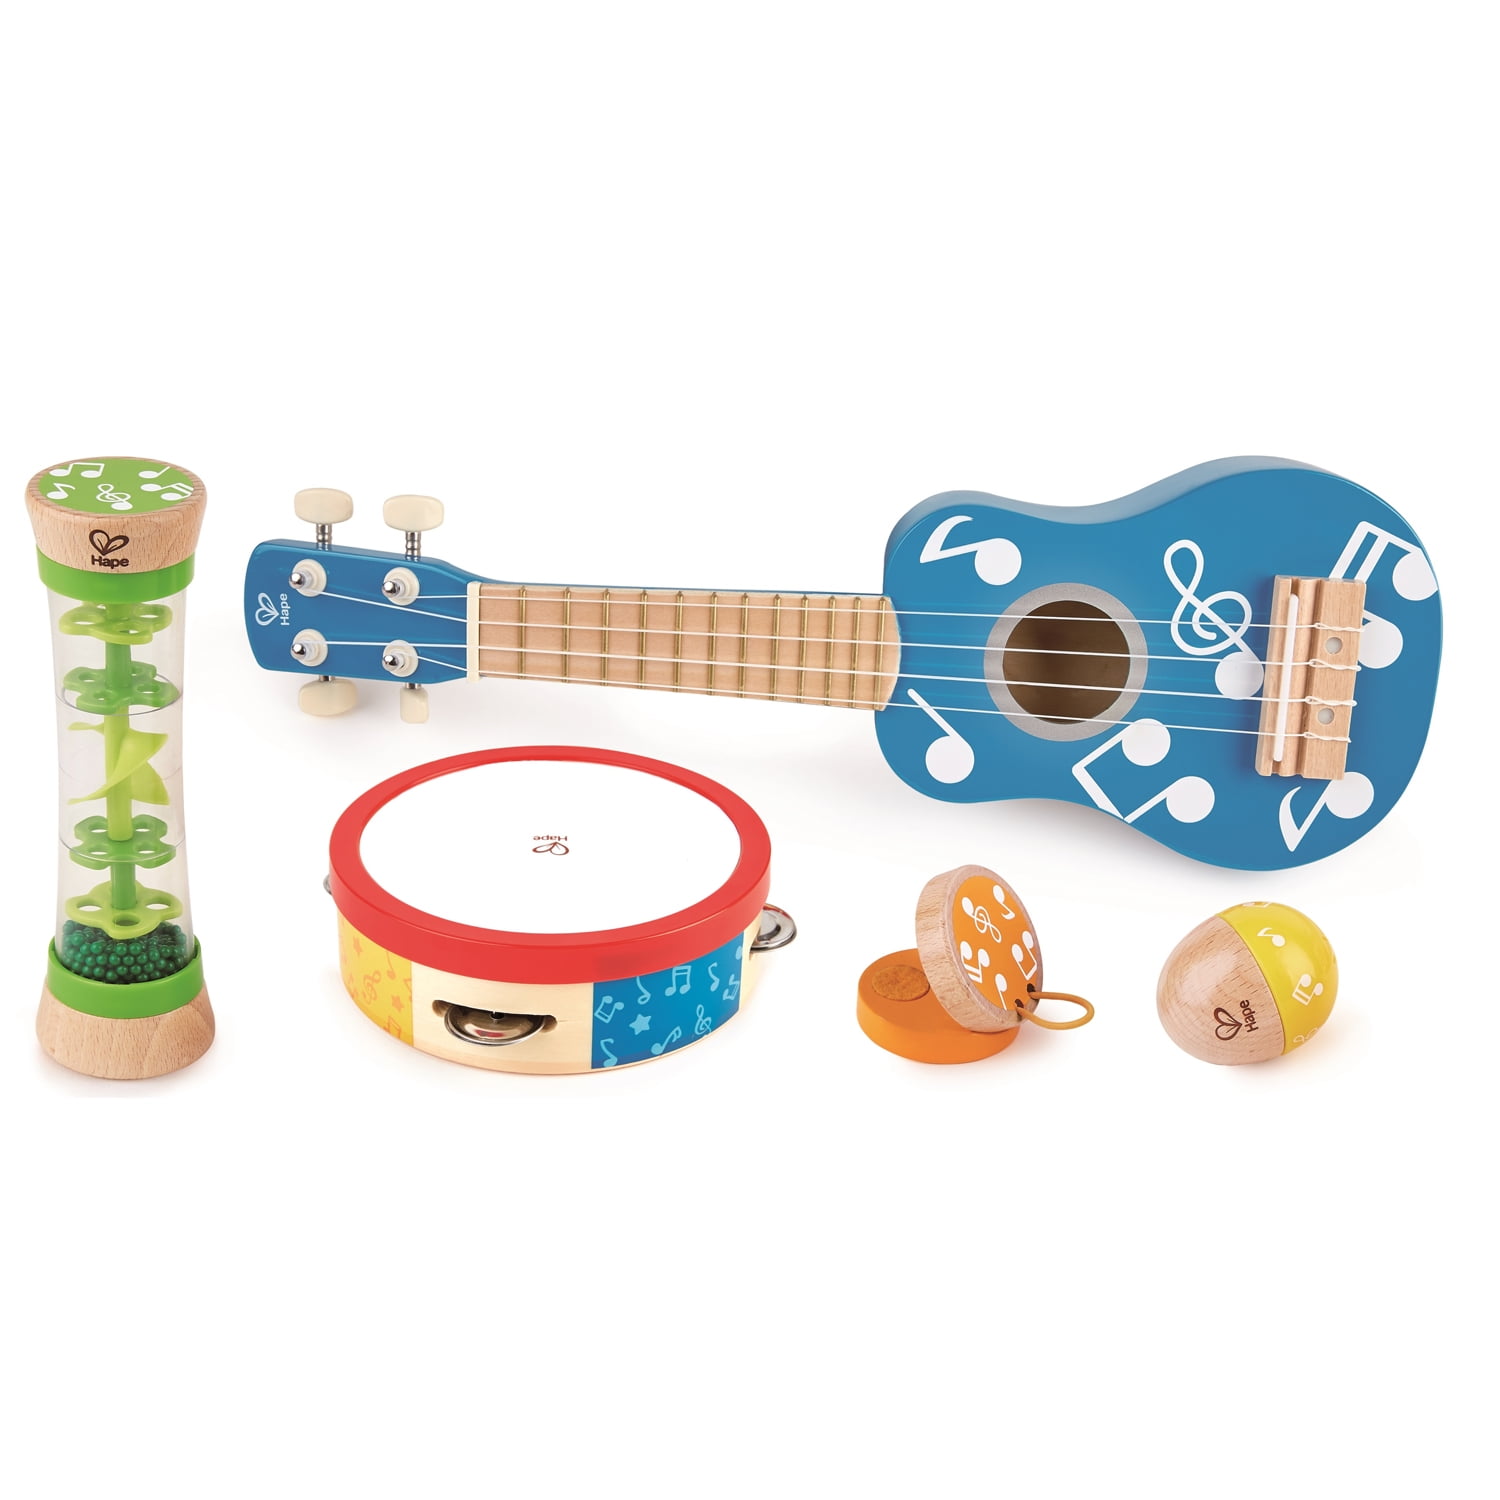 Details about    Toddler Musical Instruments Set 25 pcs Wooden Educational Music Toys Blue 